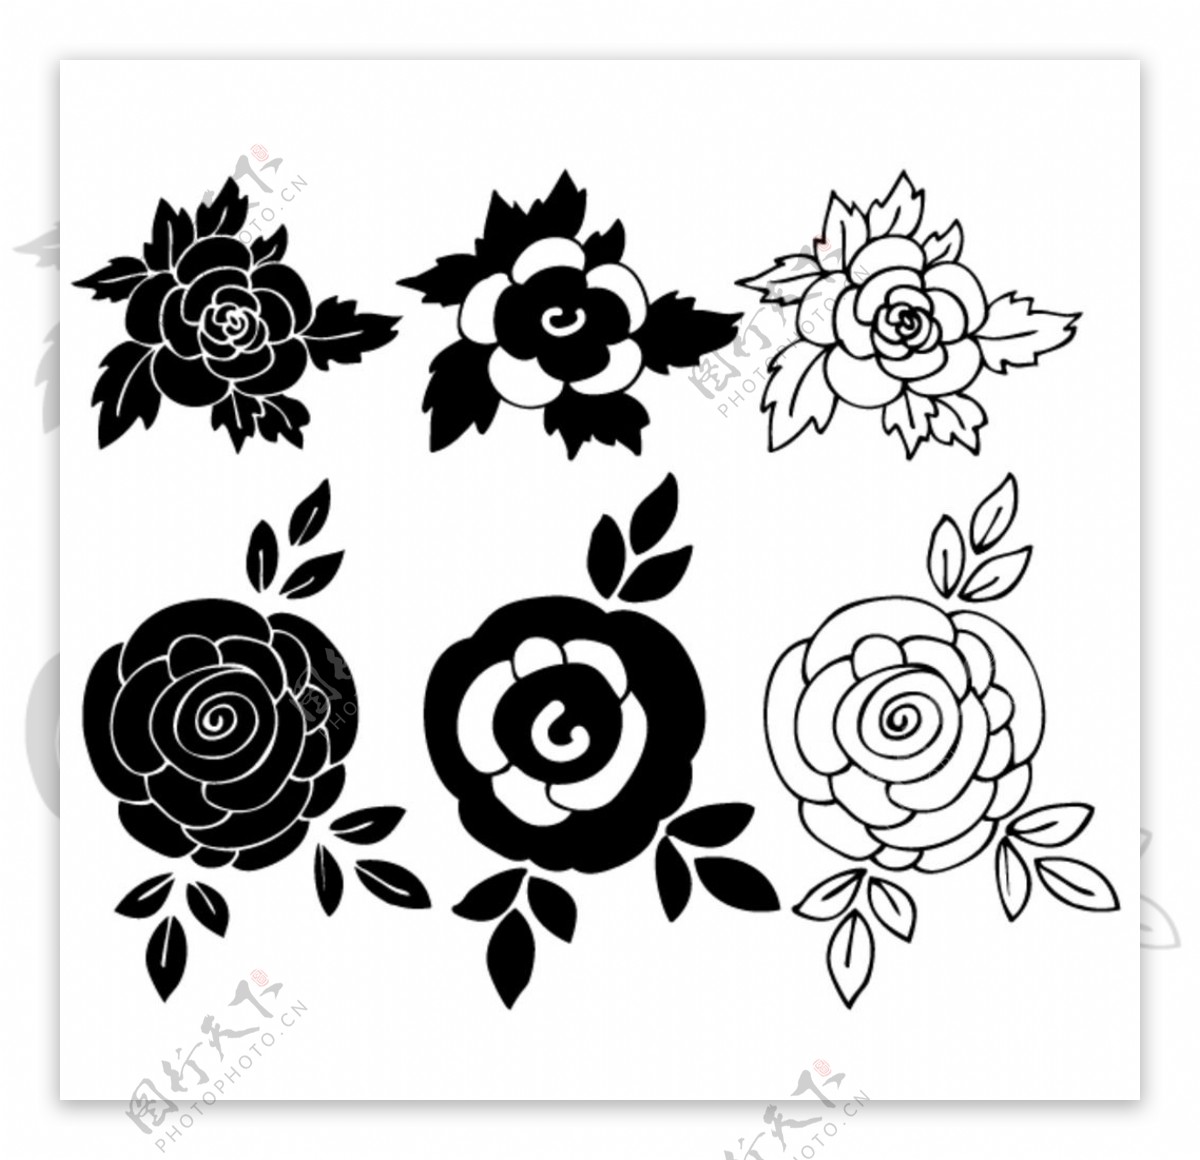 Free Images : blossom, black and white, petal, bloom, love, romance ...